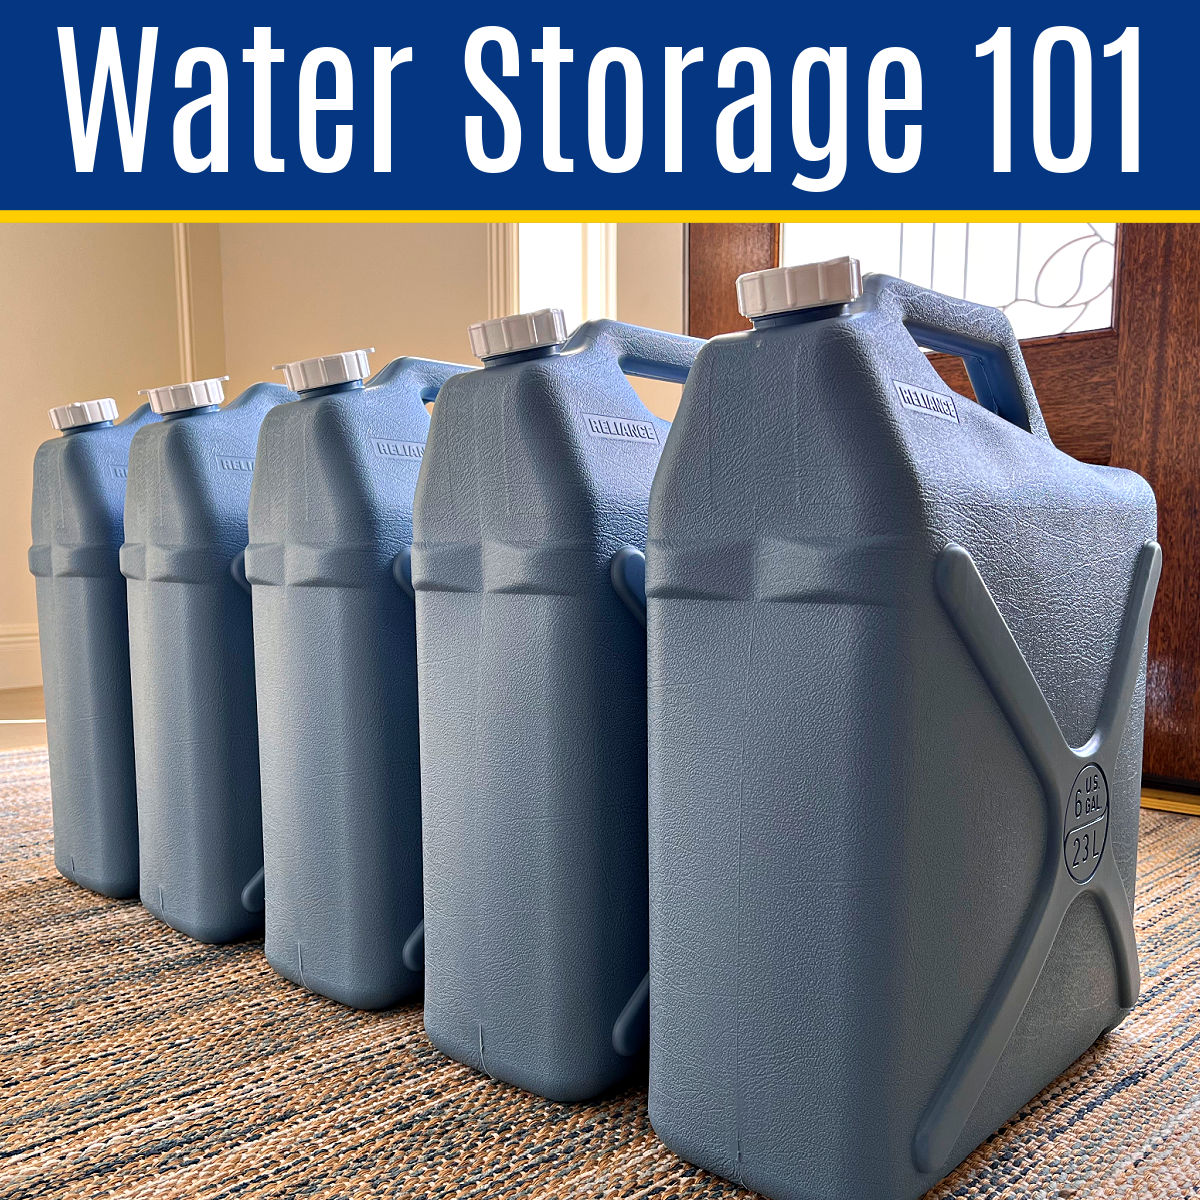 https://www.abbottsathome.com/wp-content/uploads/2022/02/How-to-Store-Water-for-Emergency-2.jpg